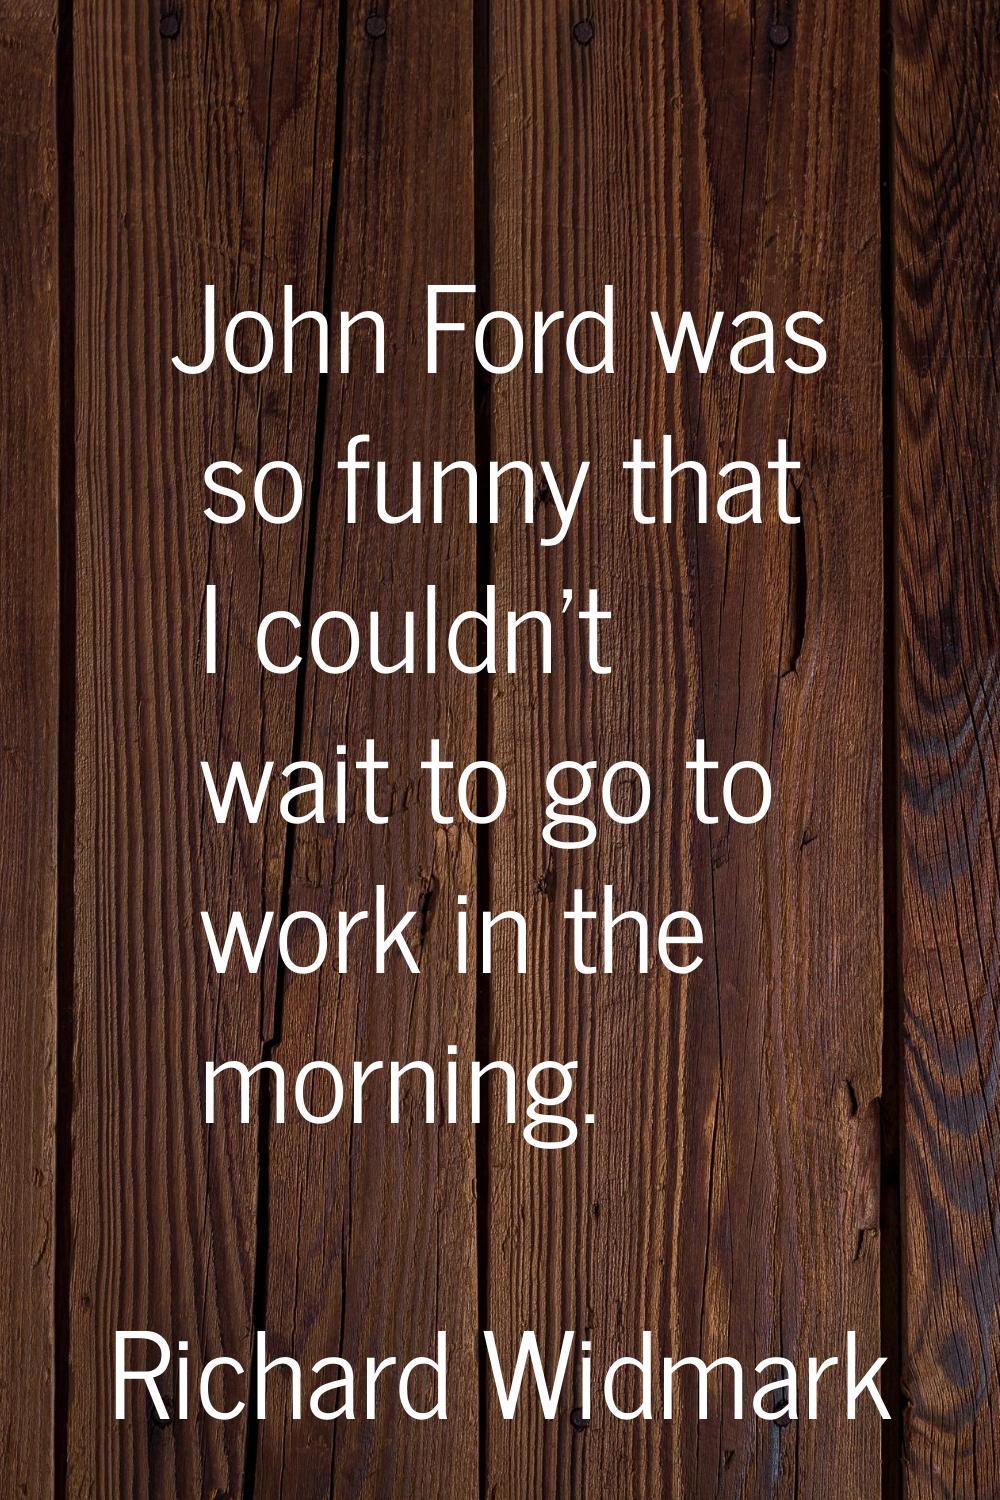 John Ford was so funny that I couldn't wait to go to work in the morning.